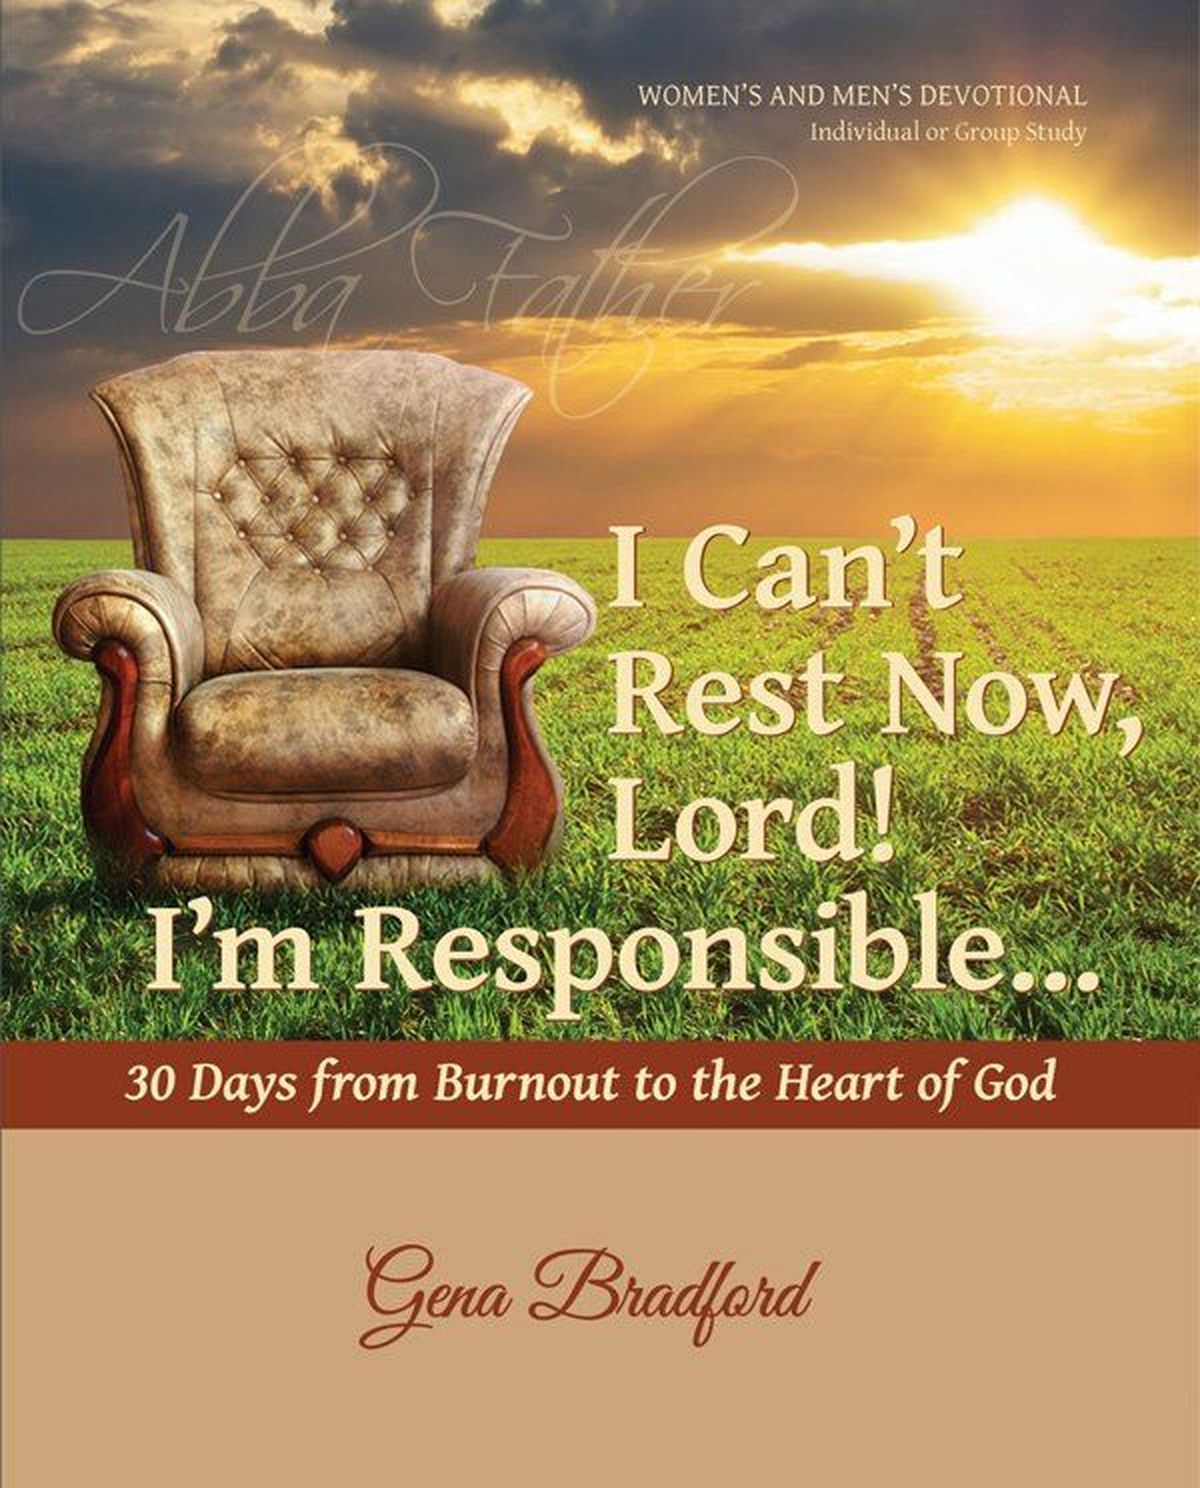 “I Can’t Rest Now, Lord! I’m Responsible” by Gena Bradford  (Courtesy)